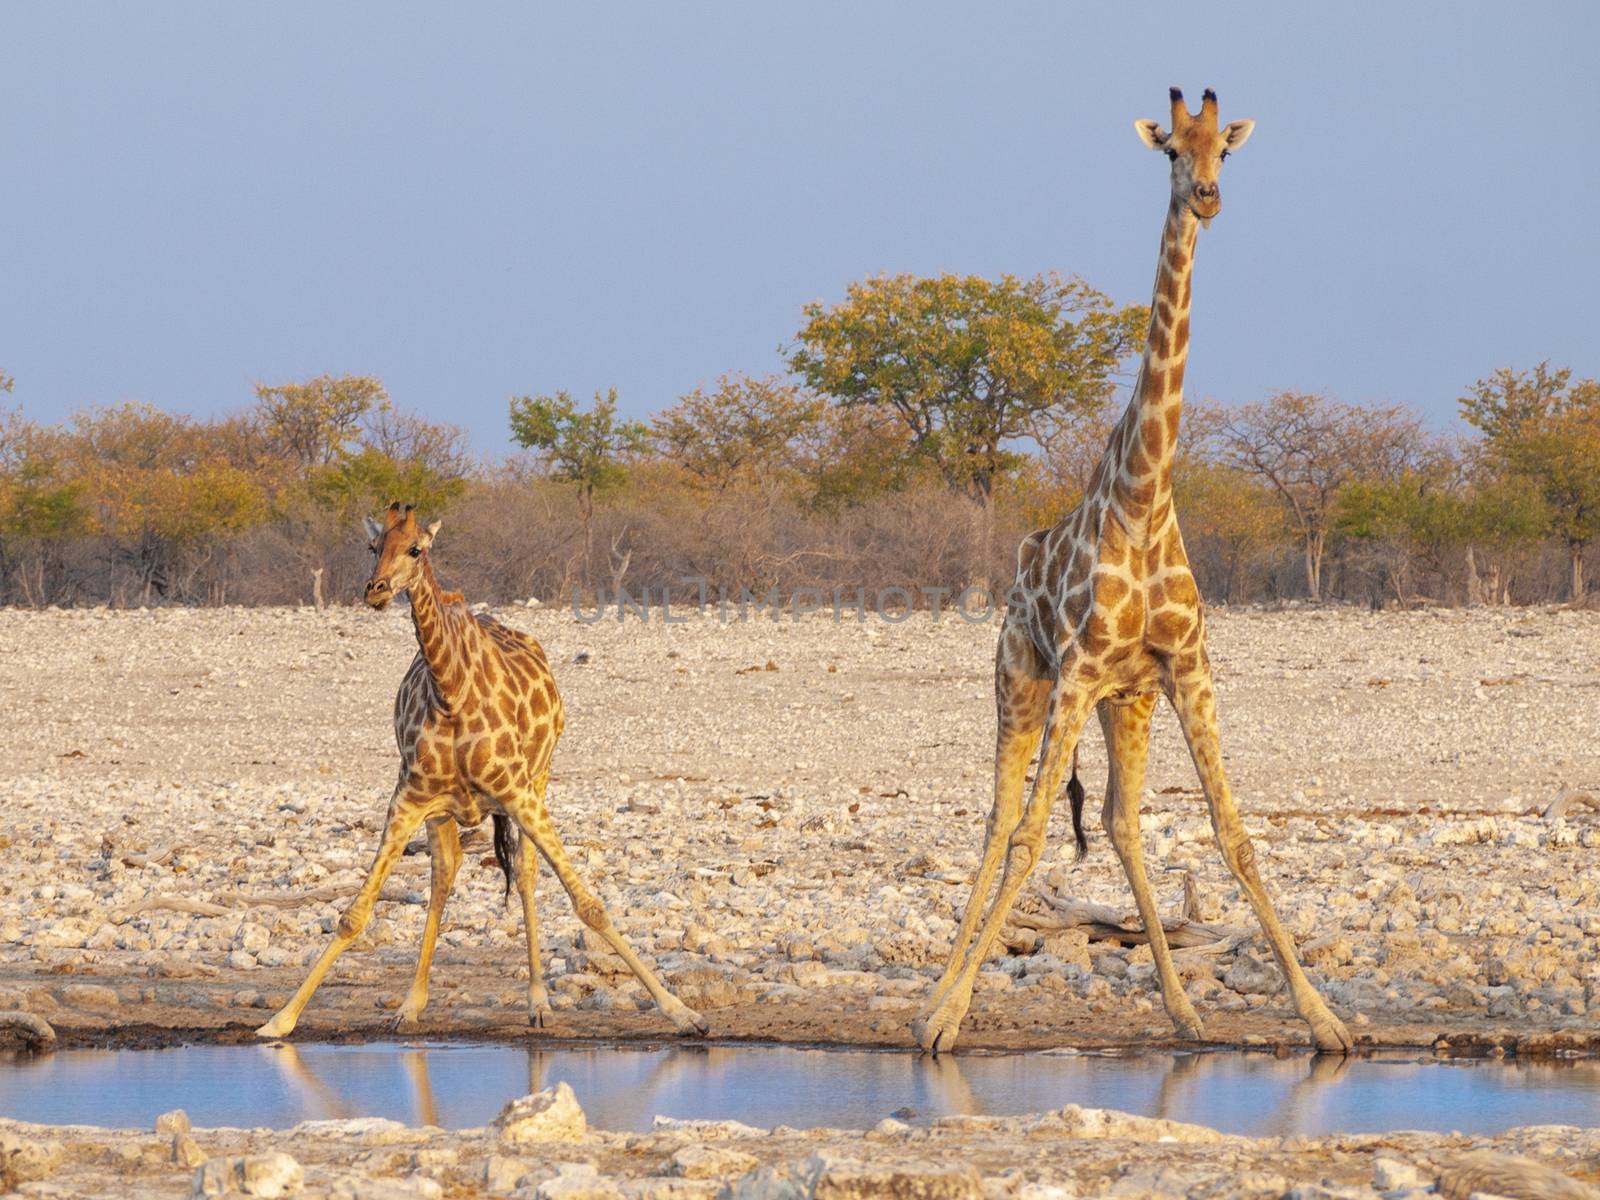 Giraffes drinking water at a waterhole at sunset in the Etosha National Park in Namibia in Africa.